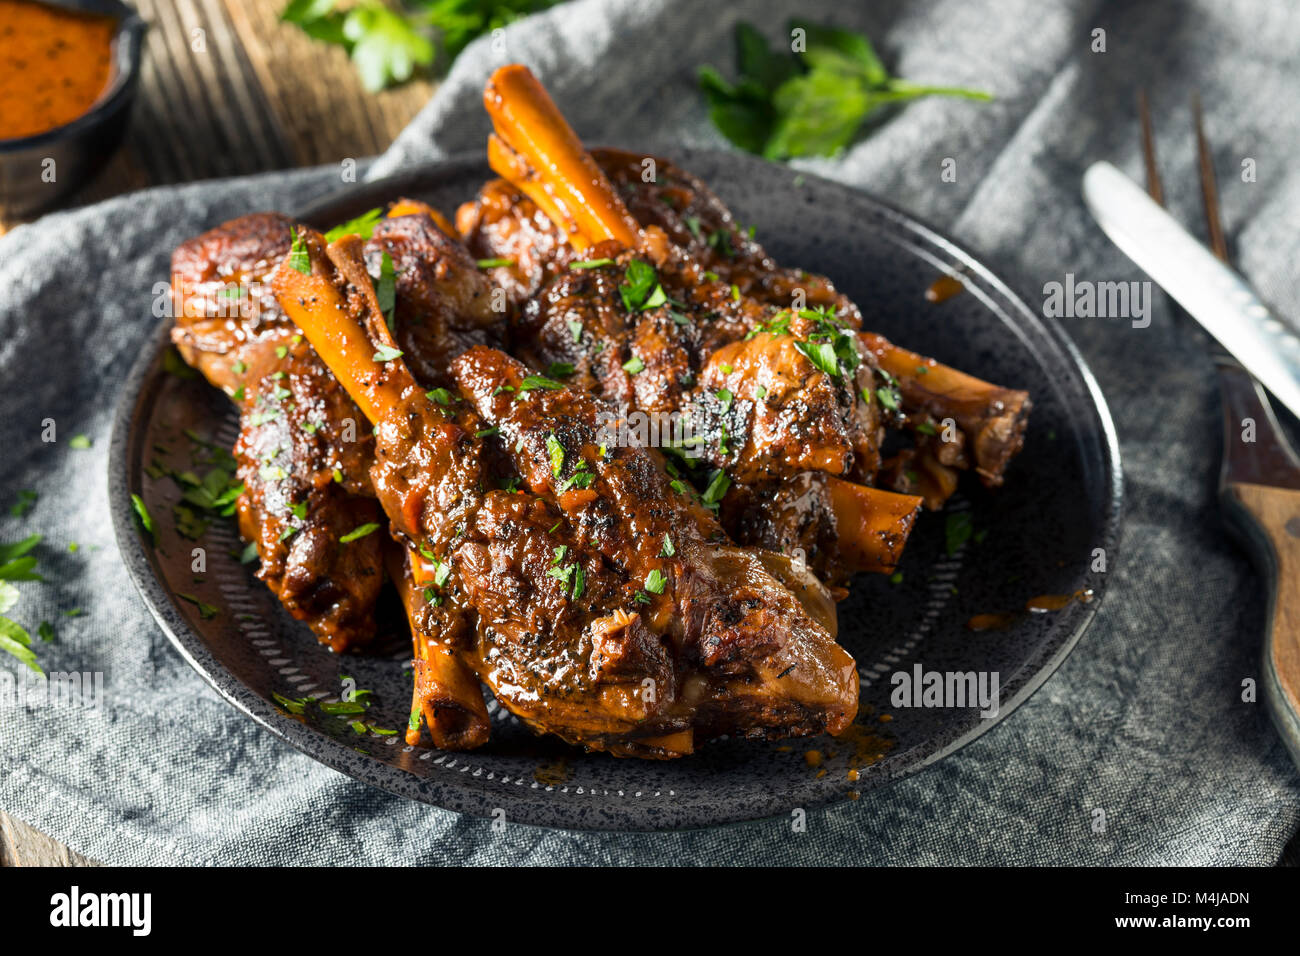 Homemade Braised Lamb Shanks with Sauce and Herbs Stock Photo